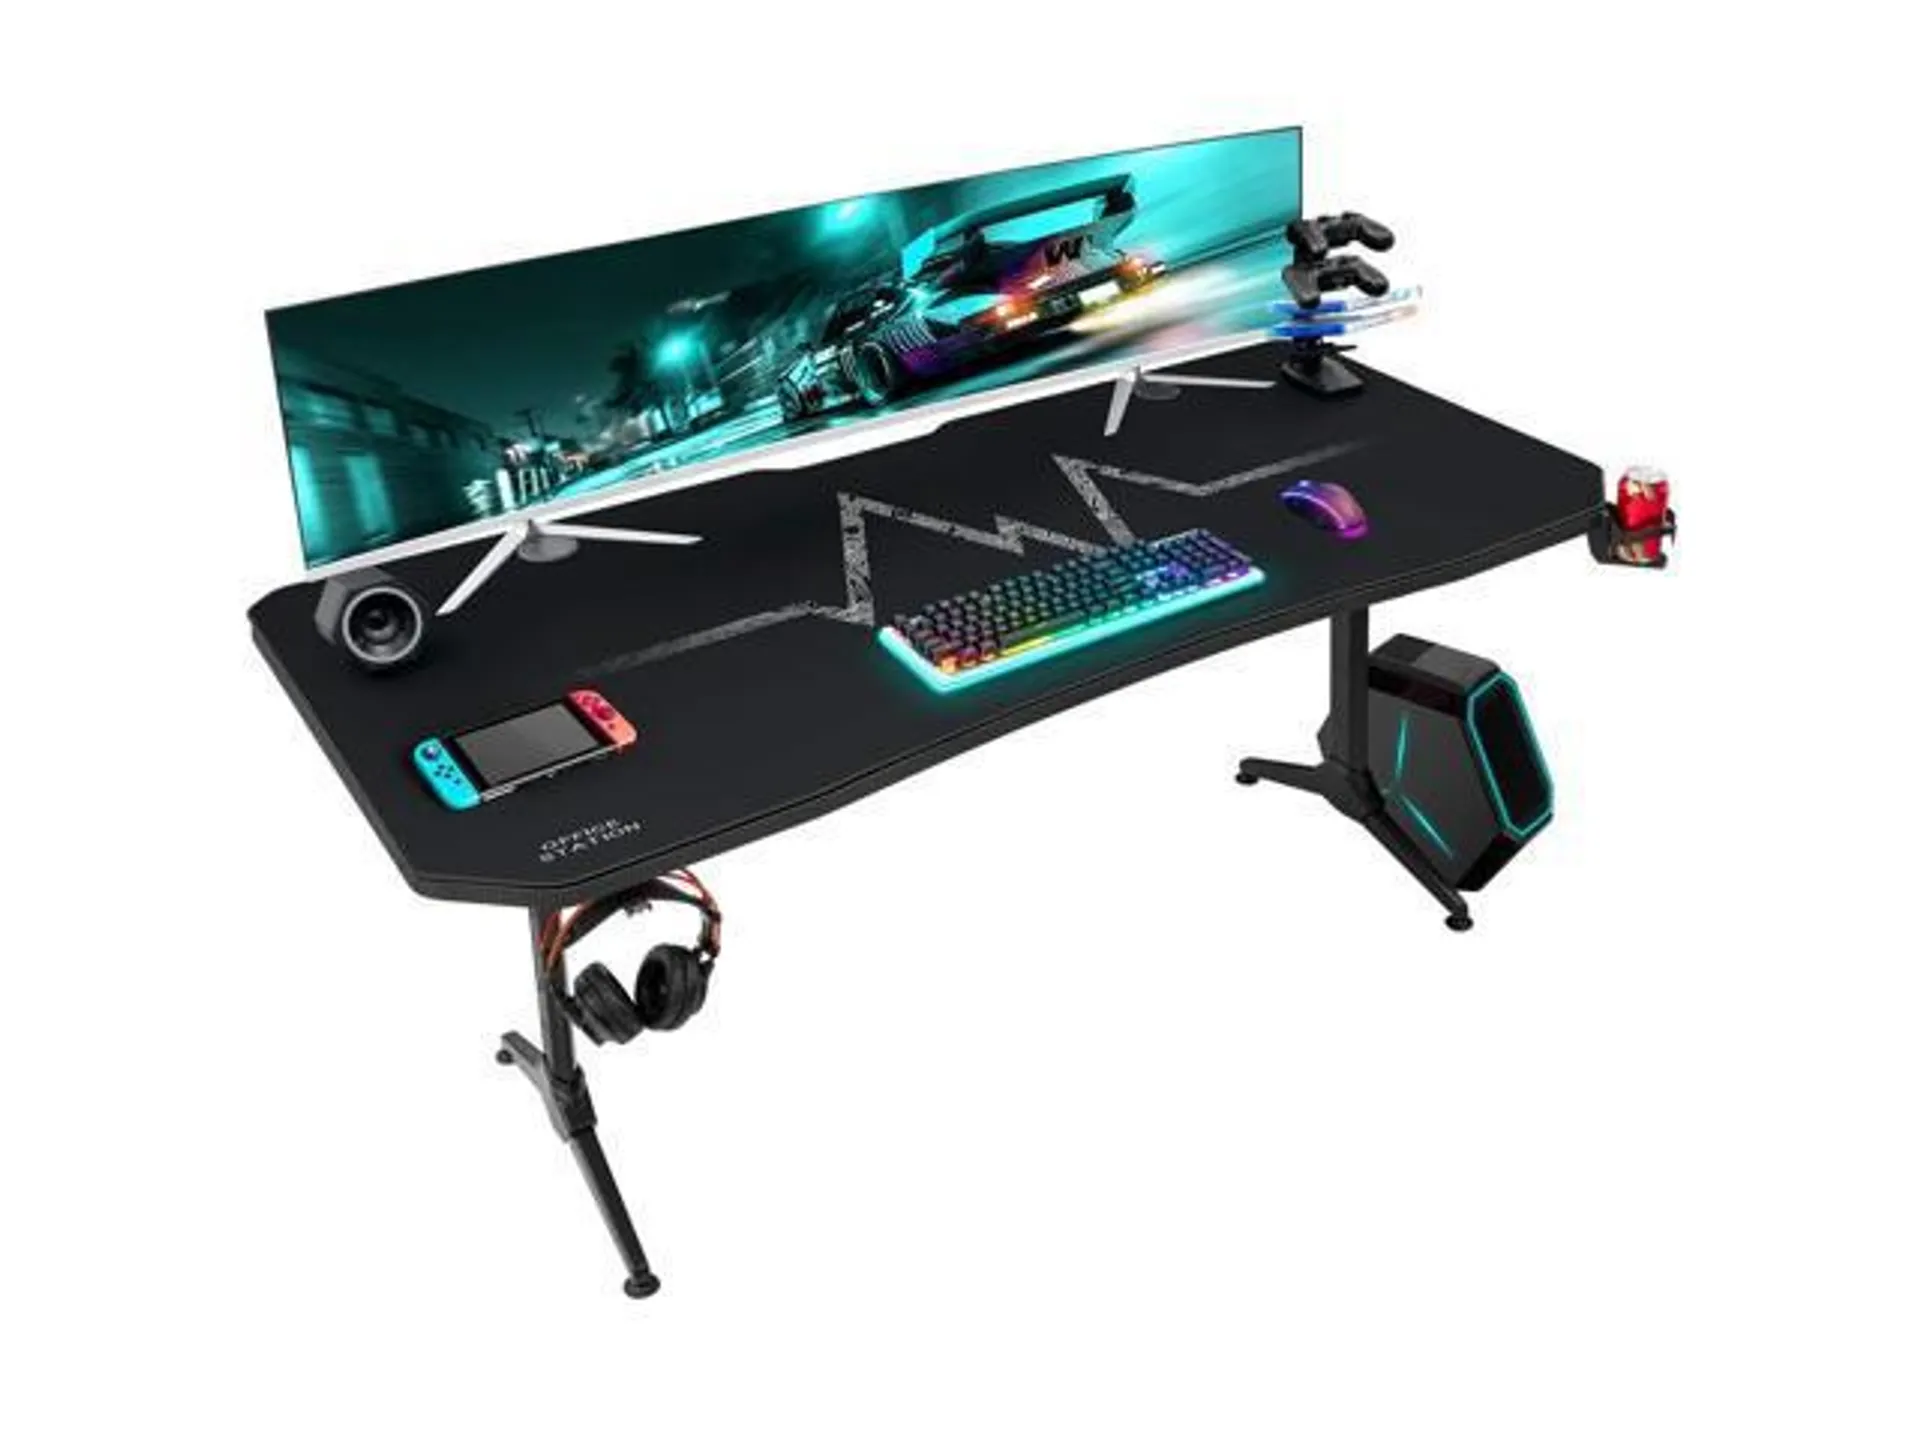 Furmax 63 Inch Gaming Desk Y-Shaped PC Computer Table with Carbon Fiber Surface Free Mouse Pad Home Office Desk Gamer Table with Game Handle Rack Headphone Hook and Cup Holder (Black)